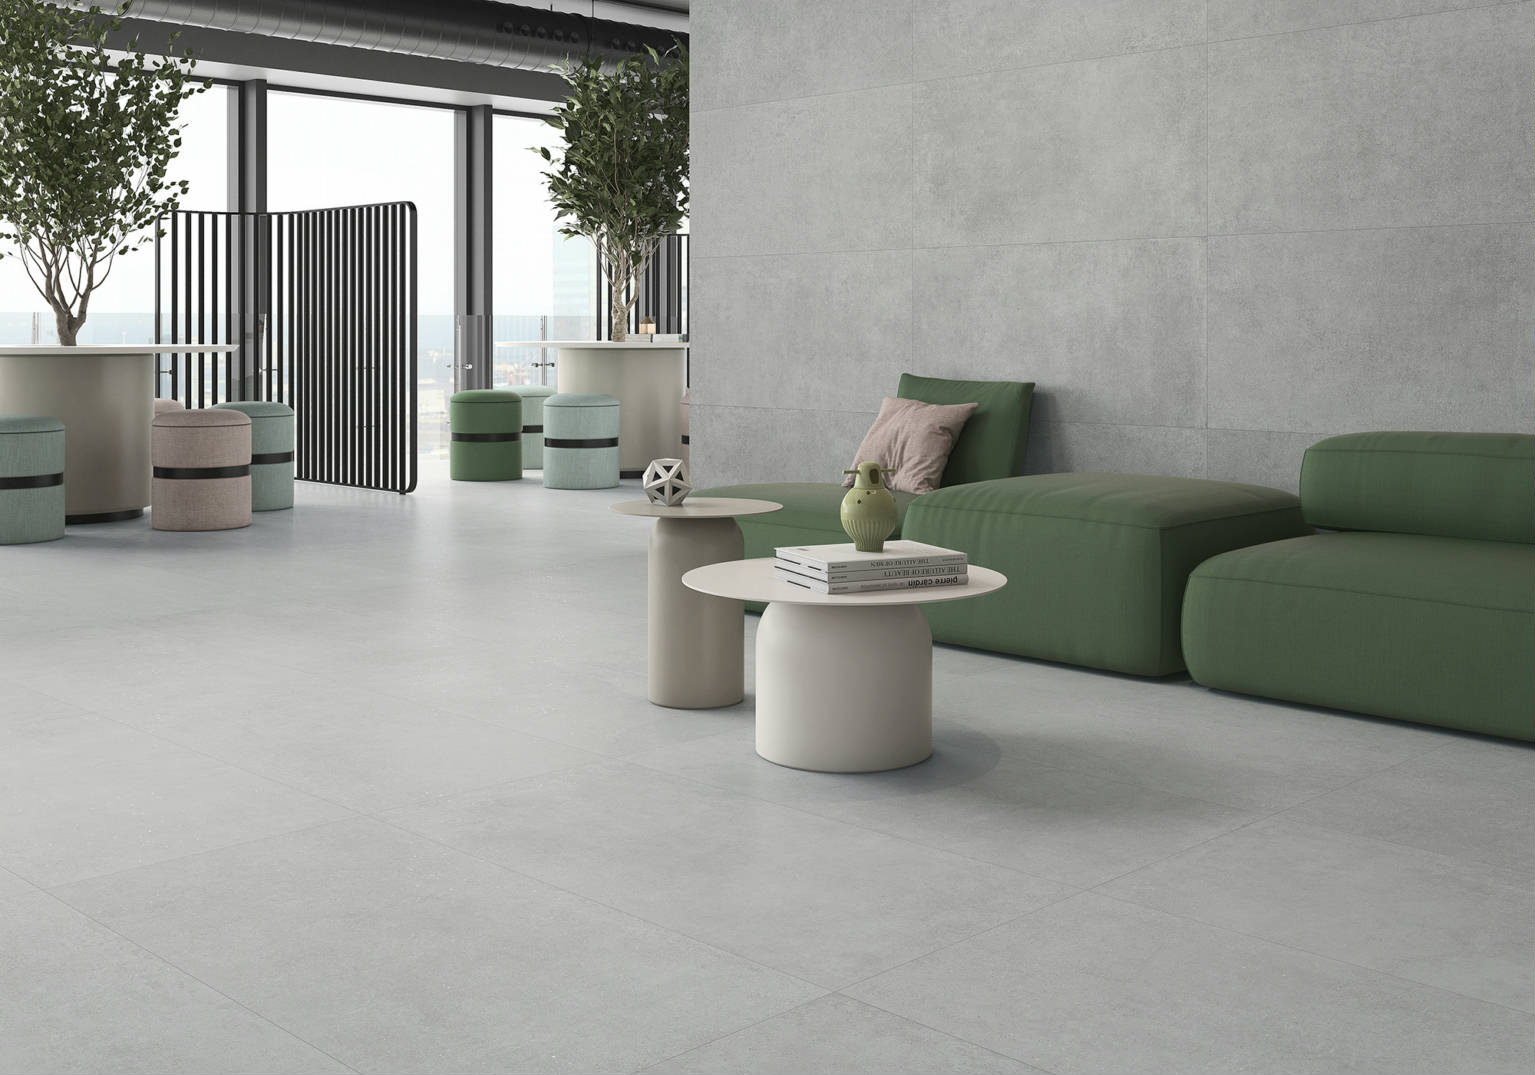 Ashland 24X48" Grey | Qualis Ceramica | Luxury Tile and Vinyl at affordable prices